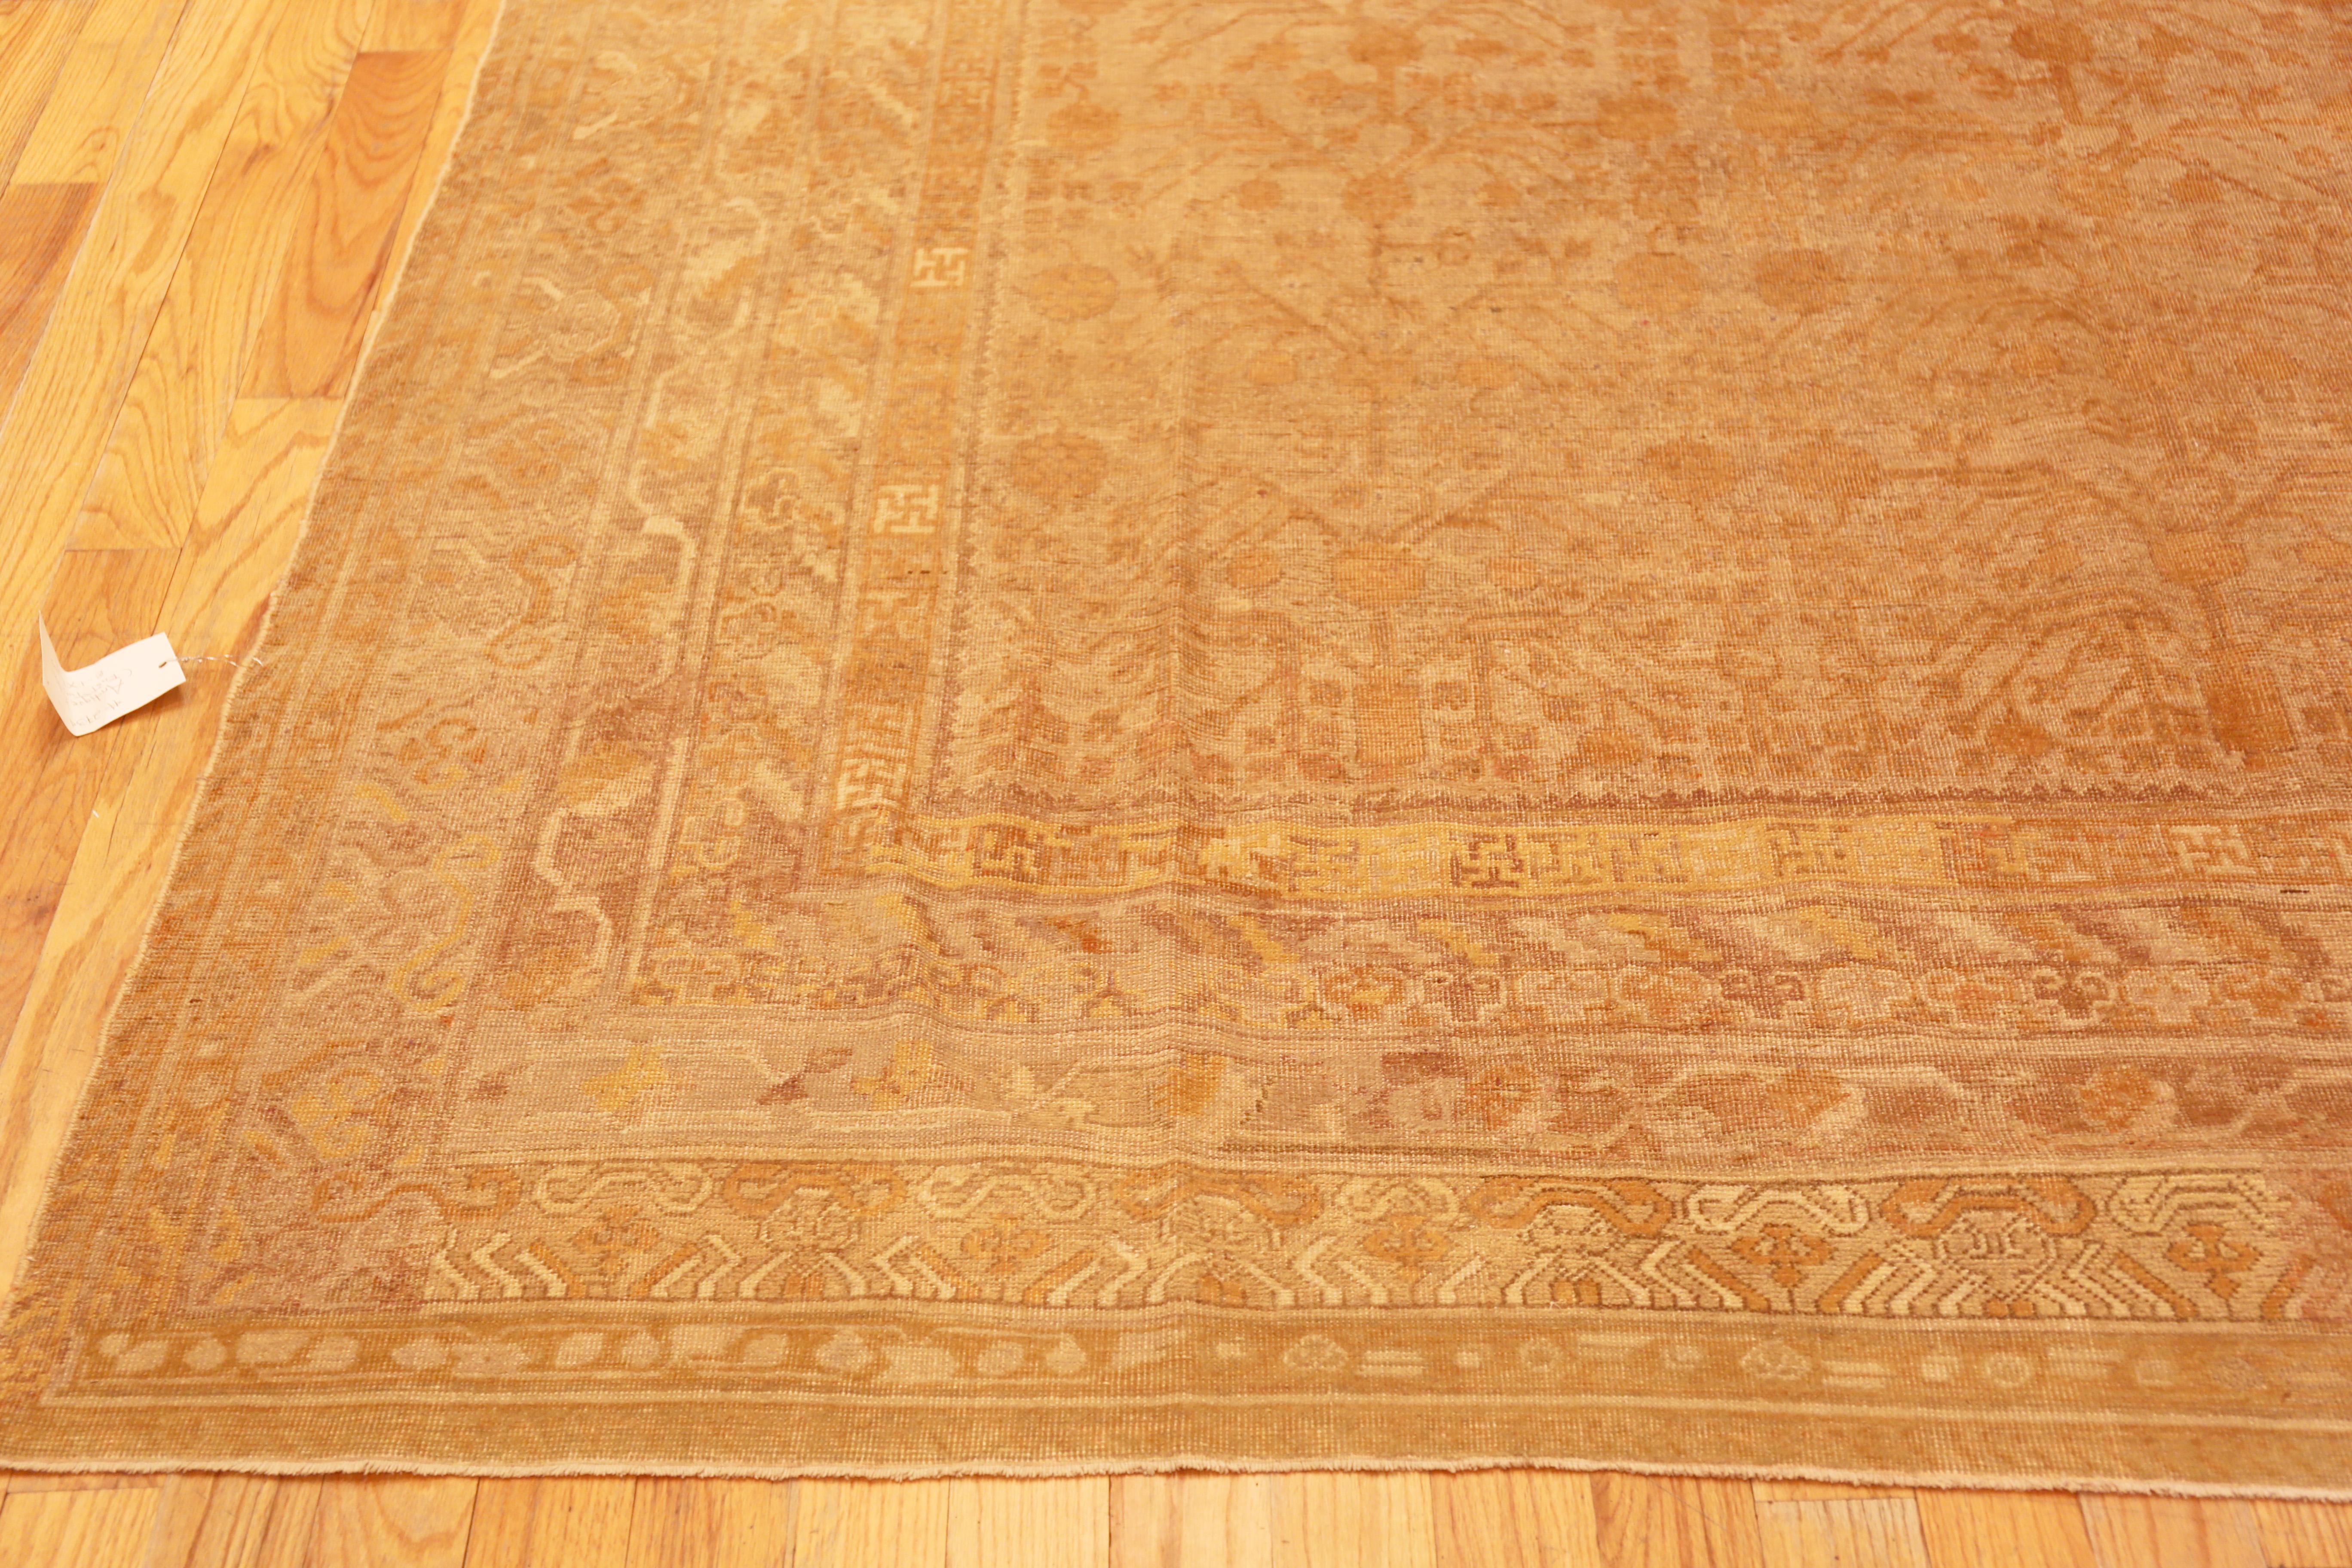 Hand-Knotted Long And Narrow Pomegranate Design Antique Khotan Rug 8'9